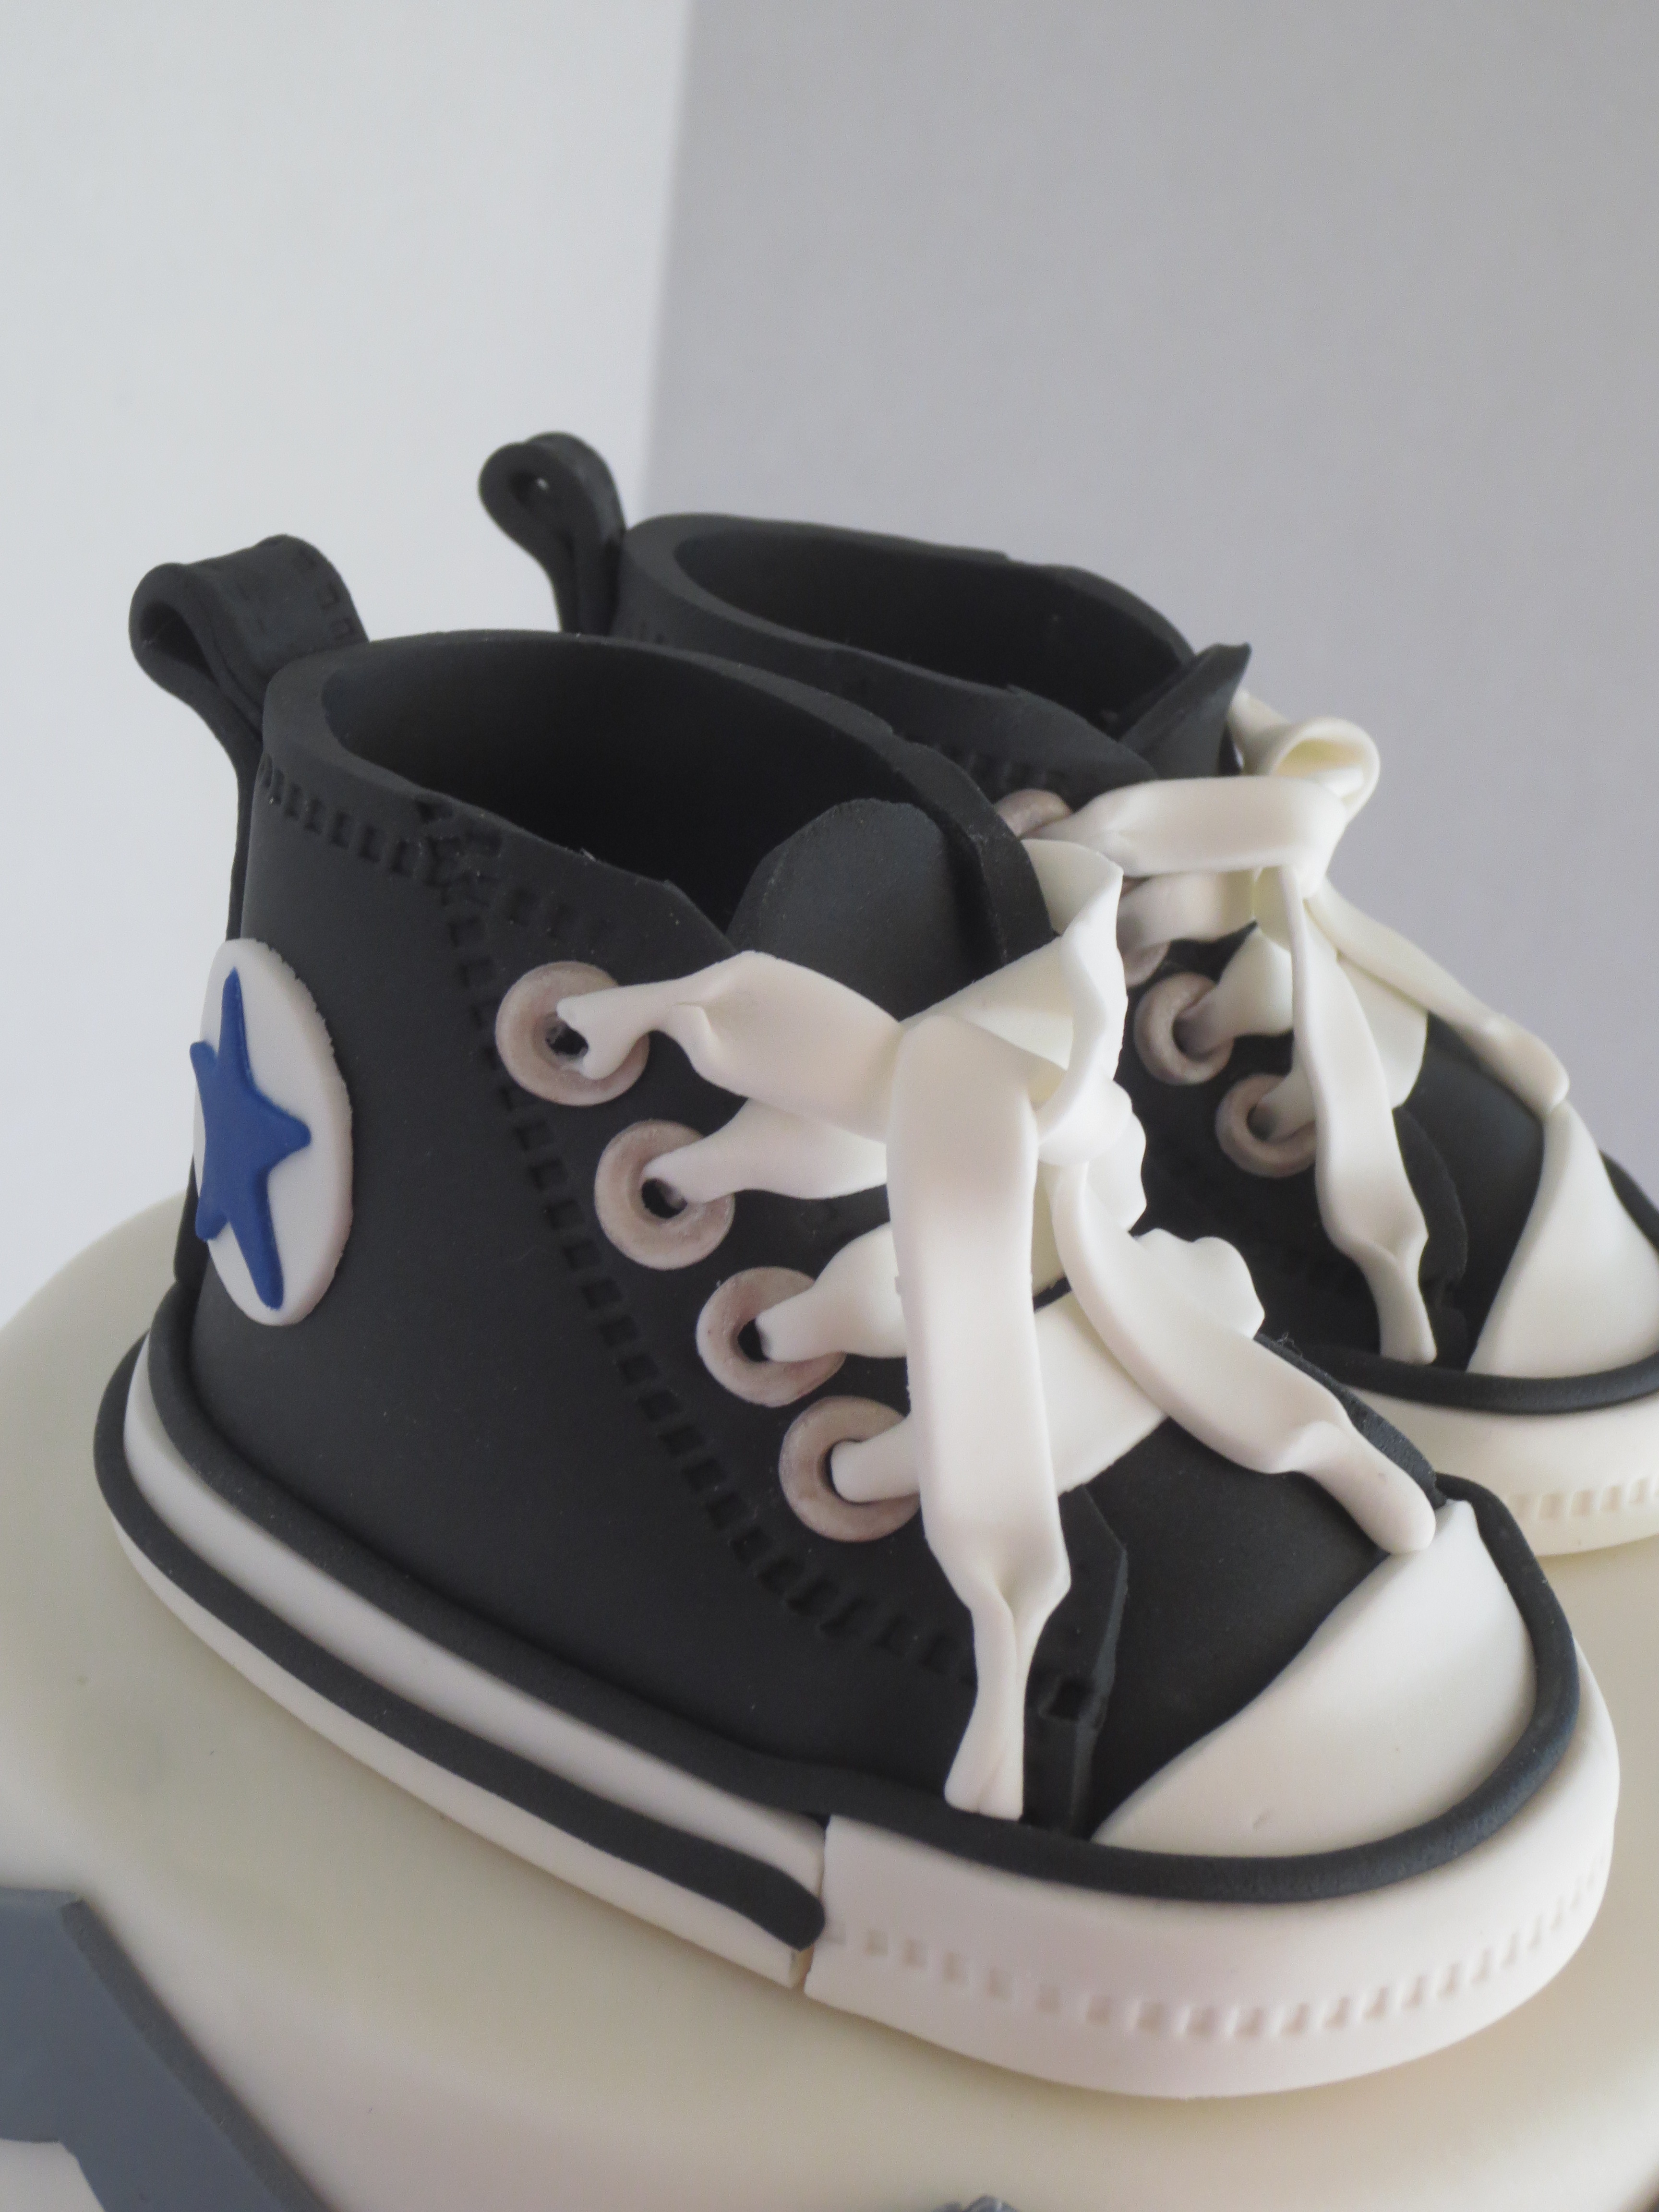 Chevron Baby Shower Cake With Fondant Converse Shoes | Byrdie Girl Custom